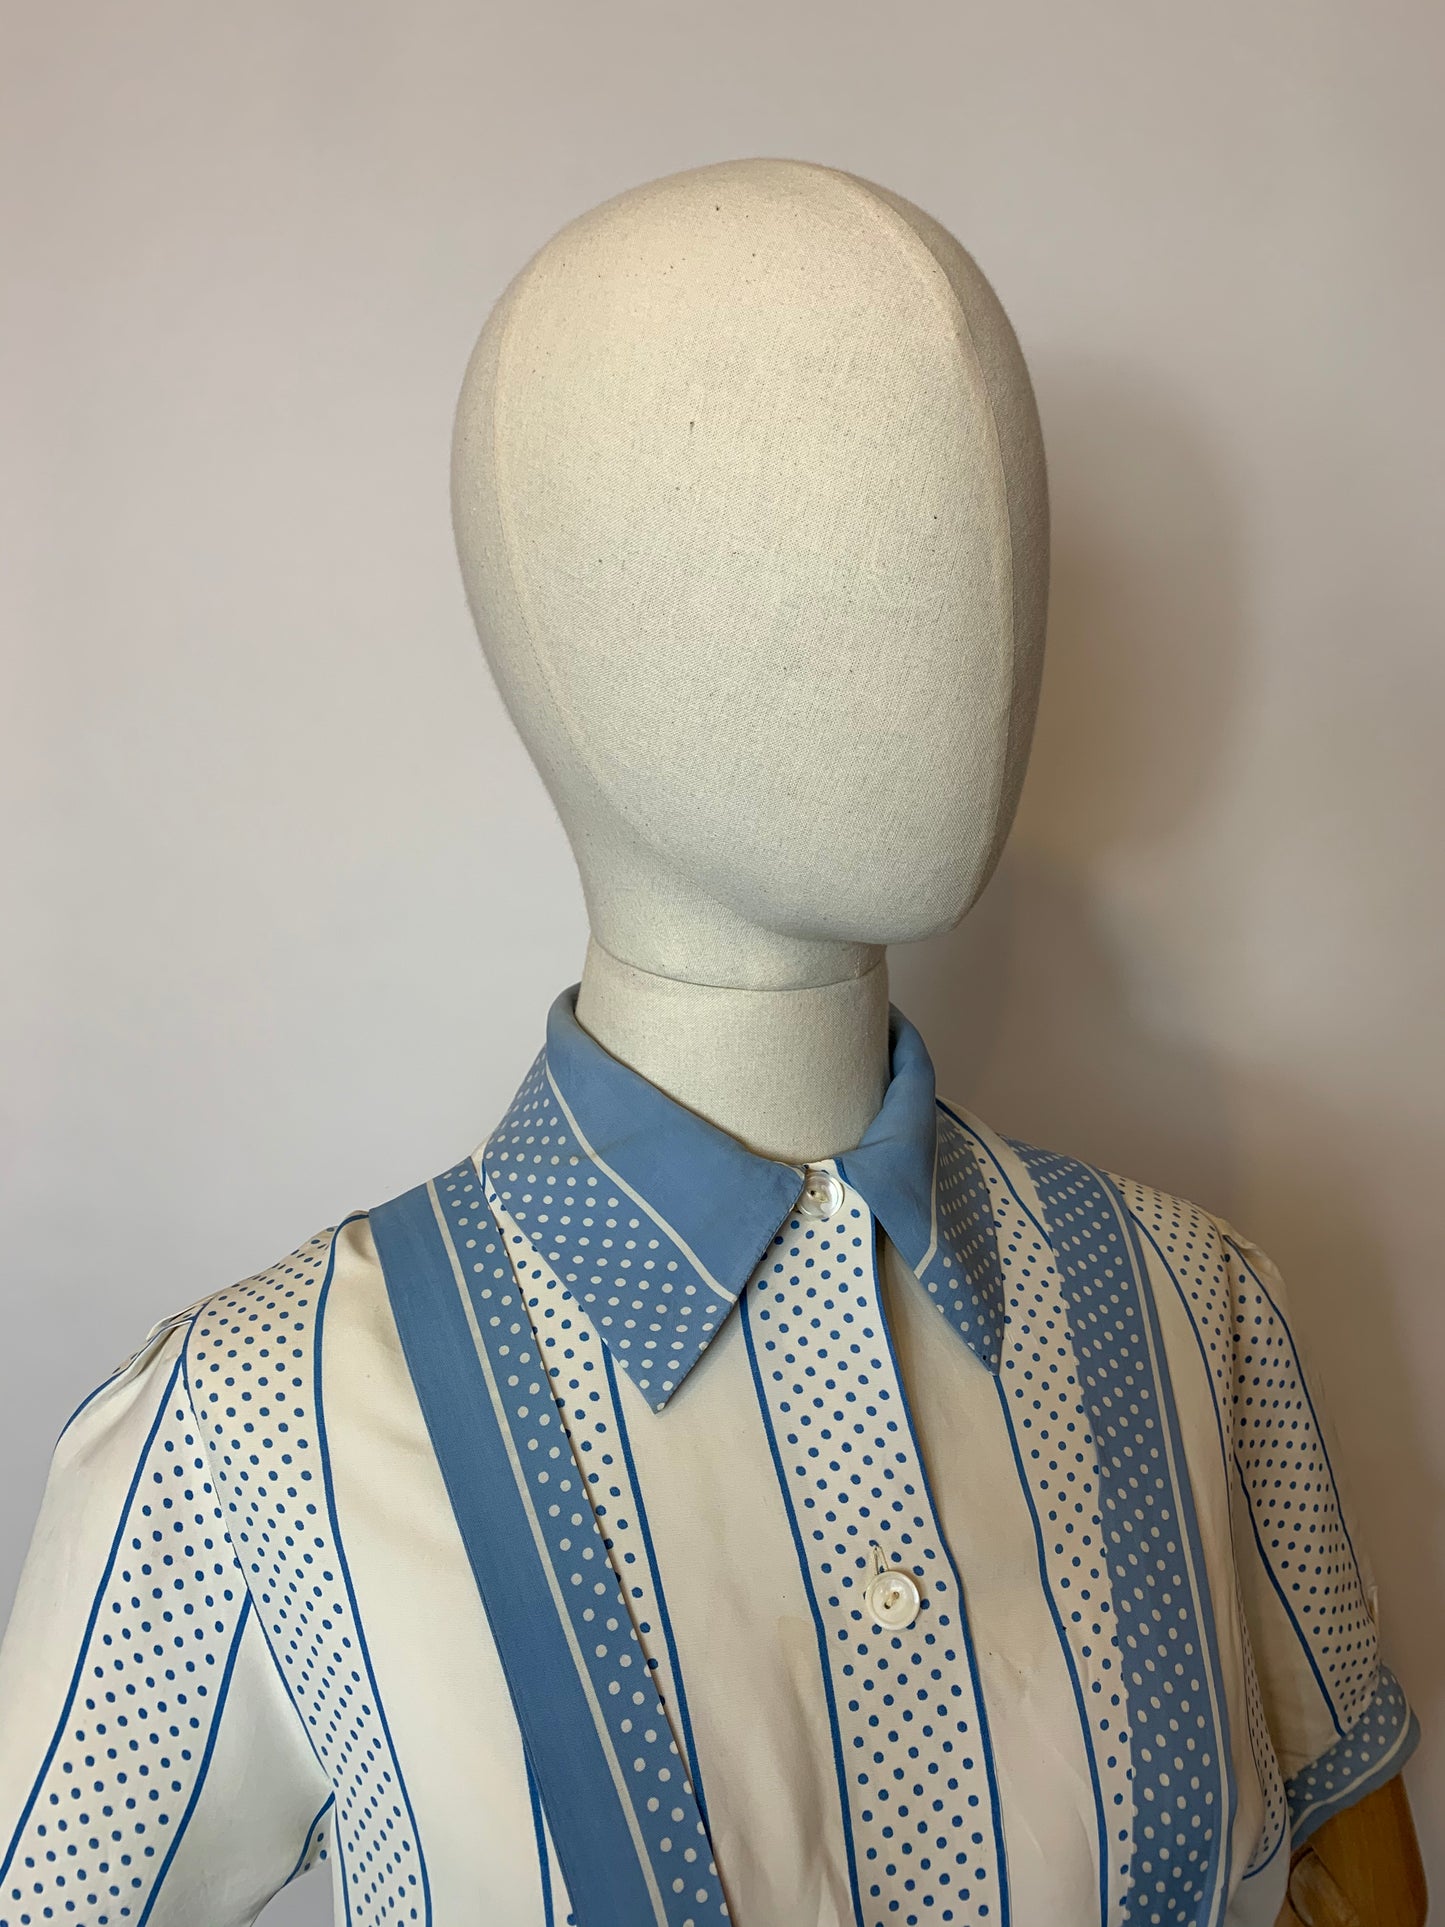 Original 1940’s 2 pc Blouse & Dungaree Set - In the Most Summery Of Colour Pallets with Polka Dots